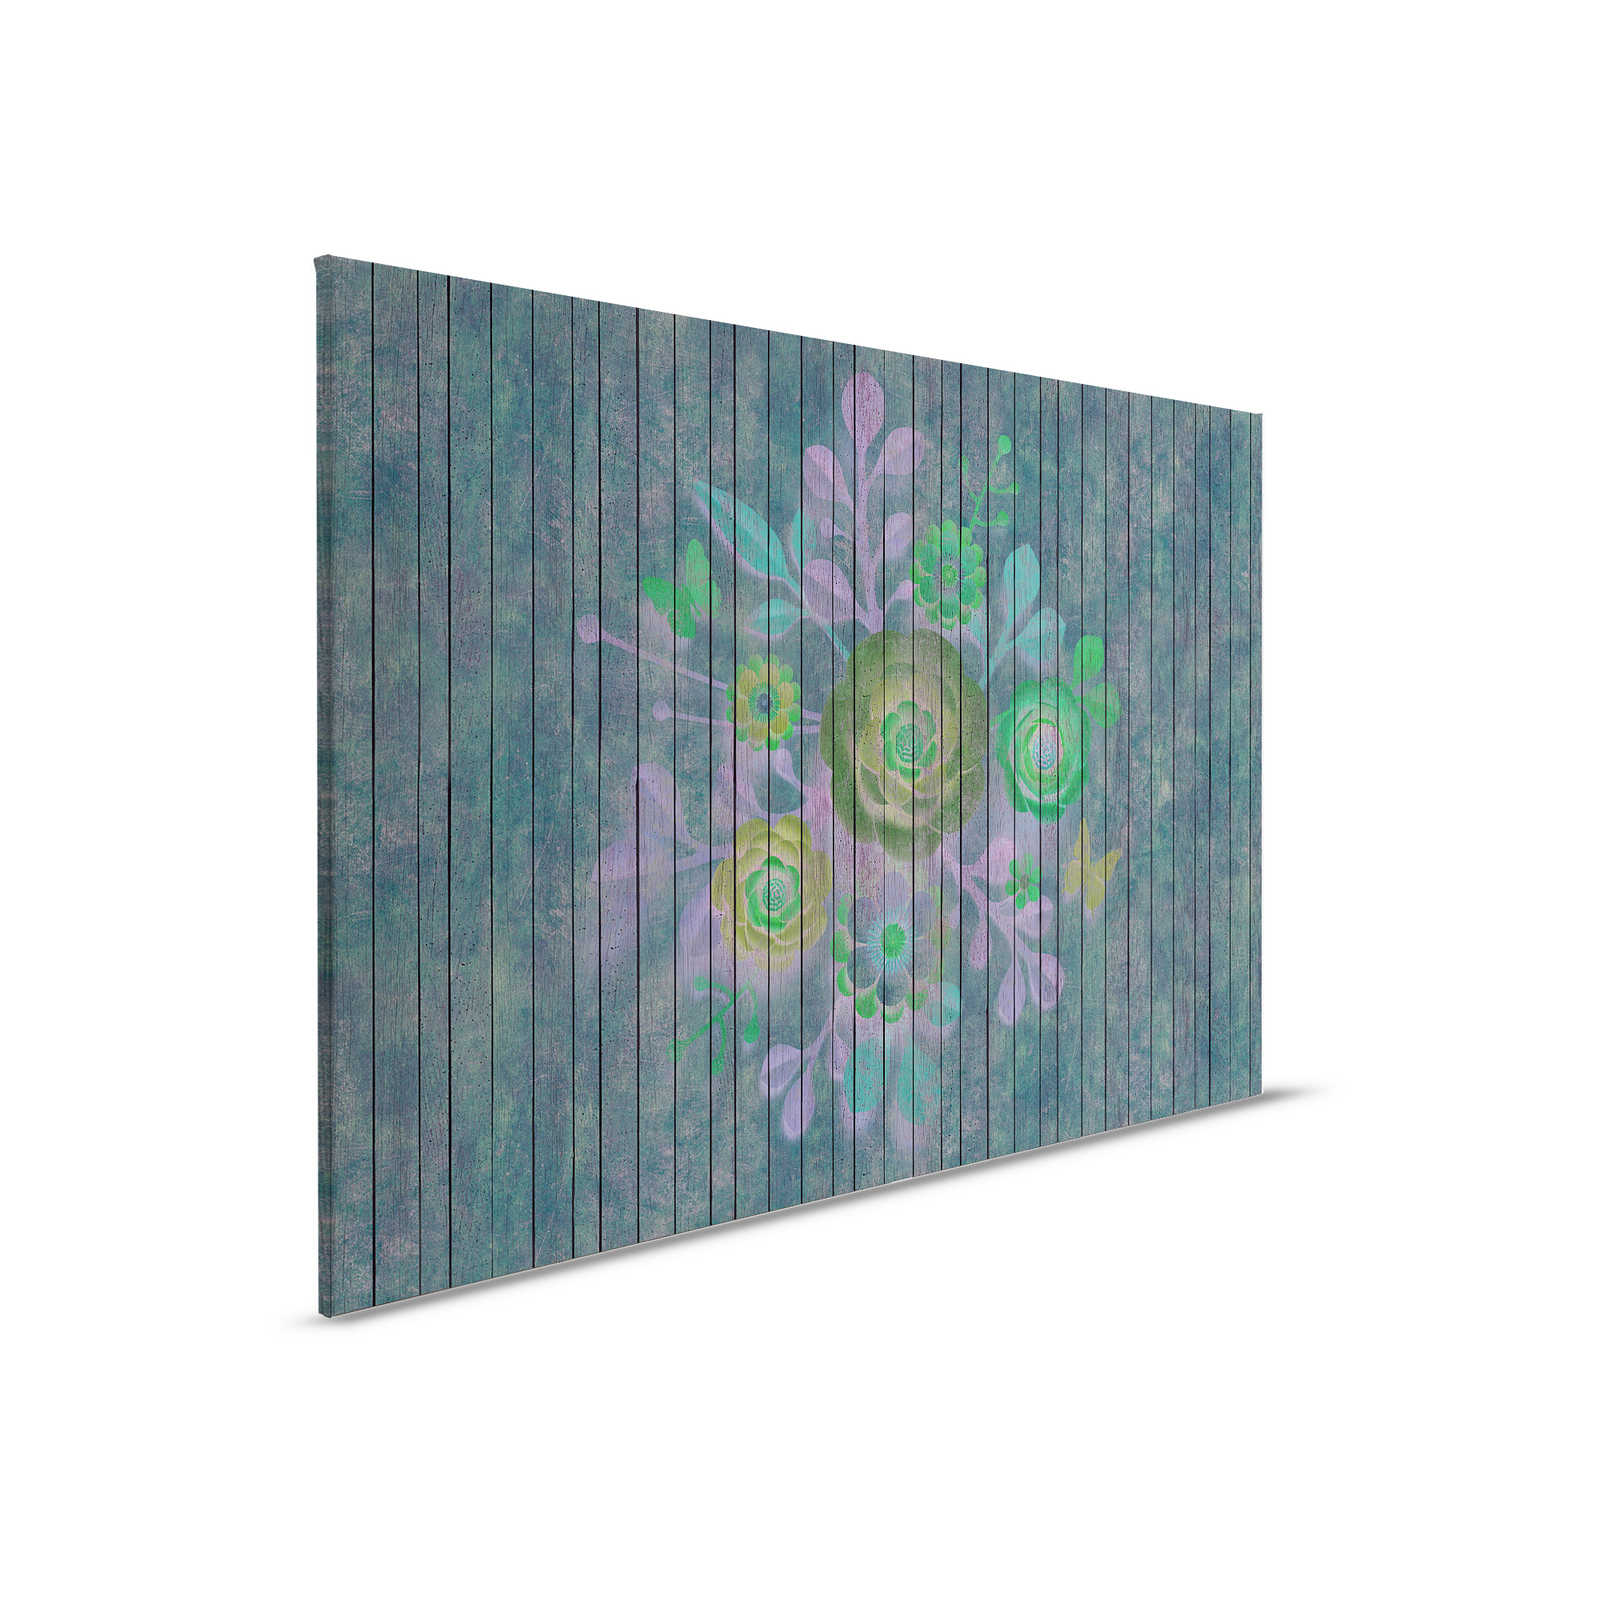 Spray bouquet 2 - Canvas painting in wood panel structure with flowers on board wall - 0.90 m x 0.60 m
